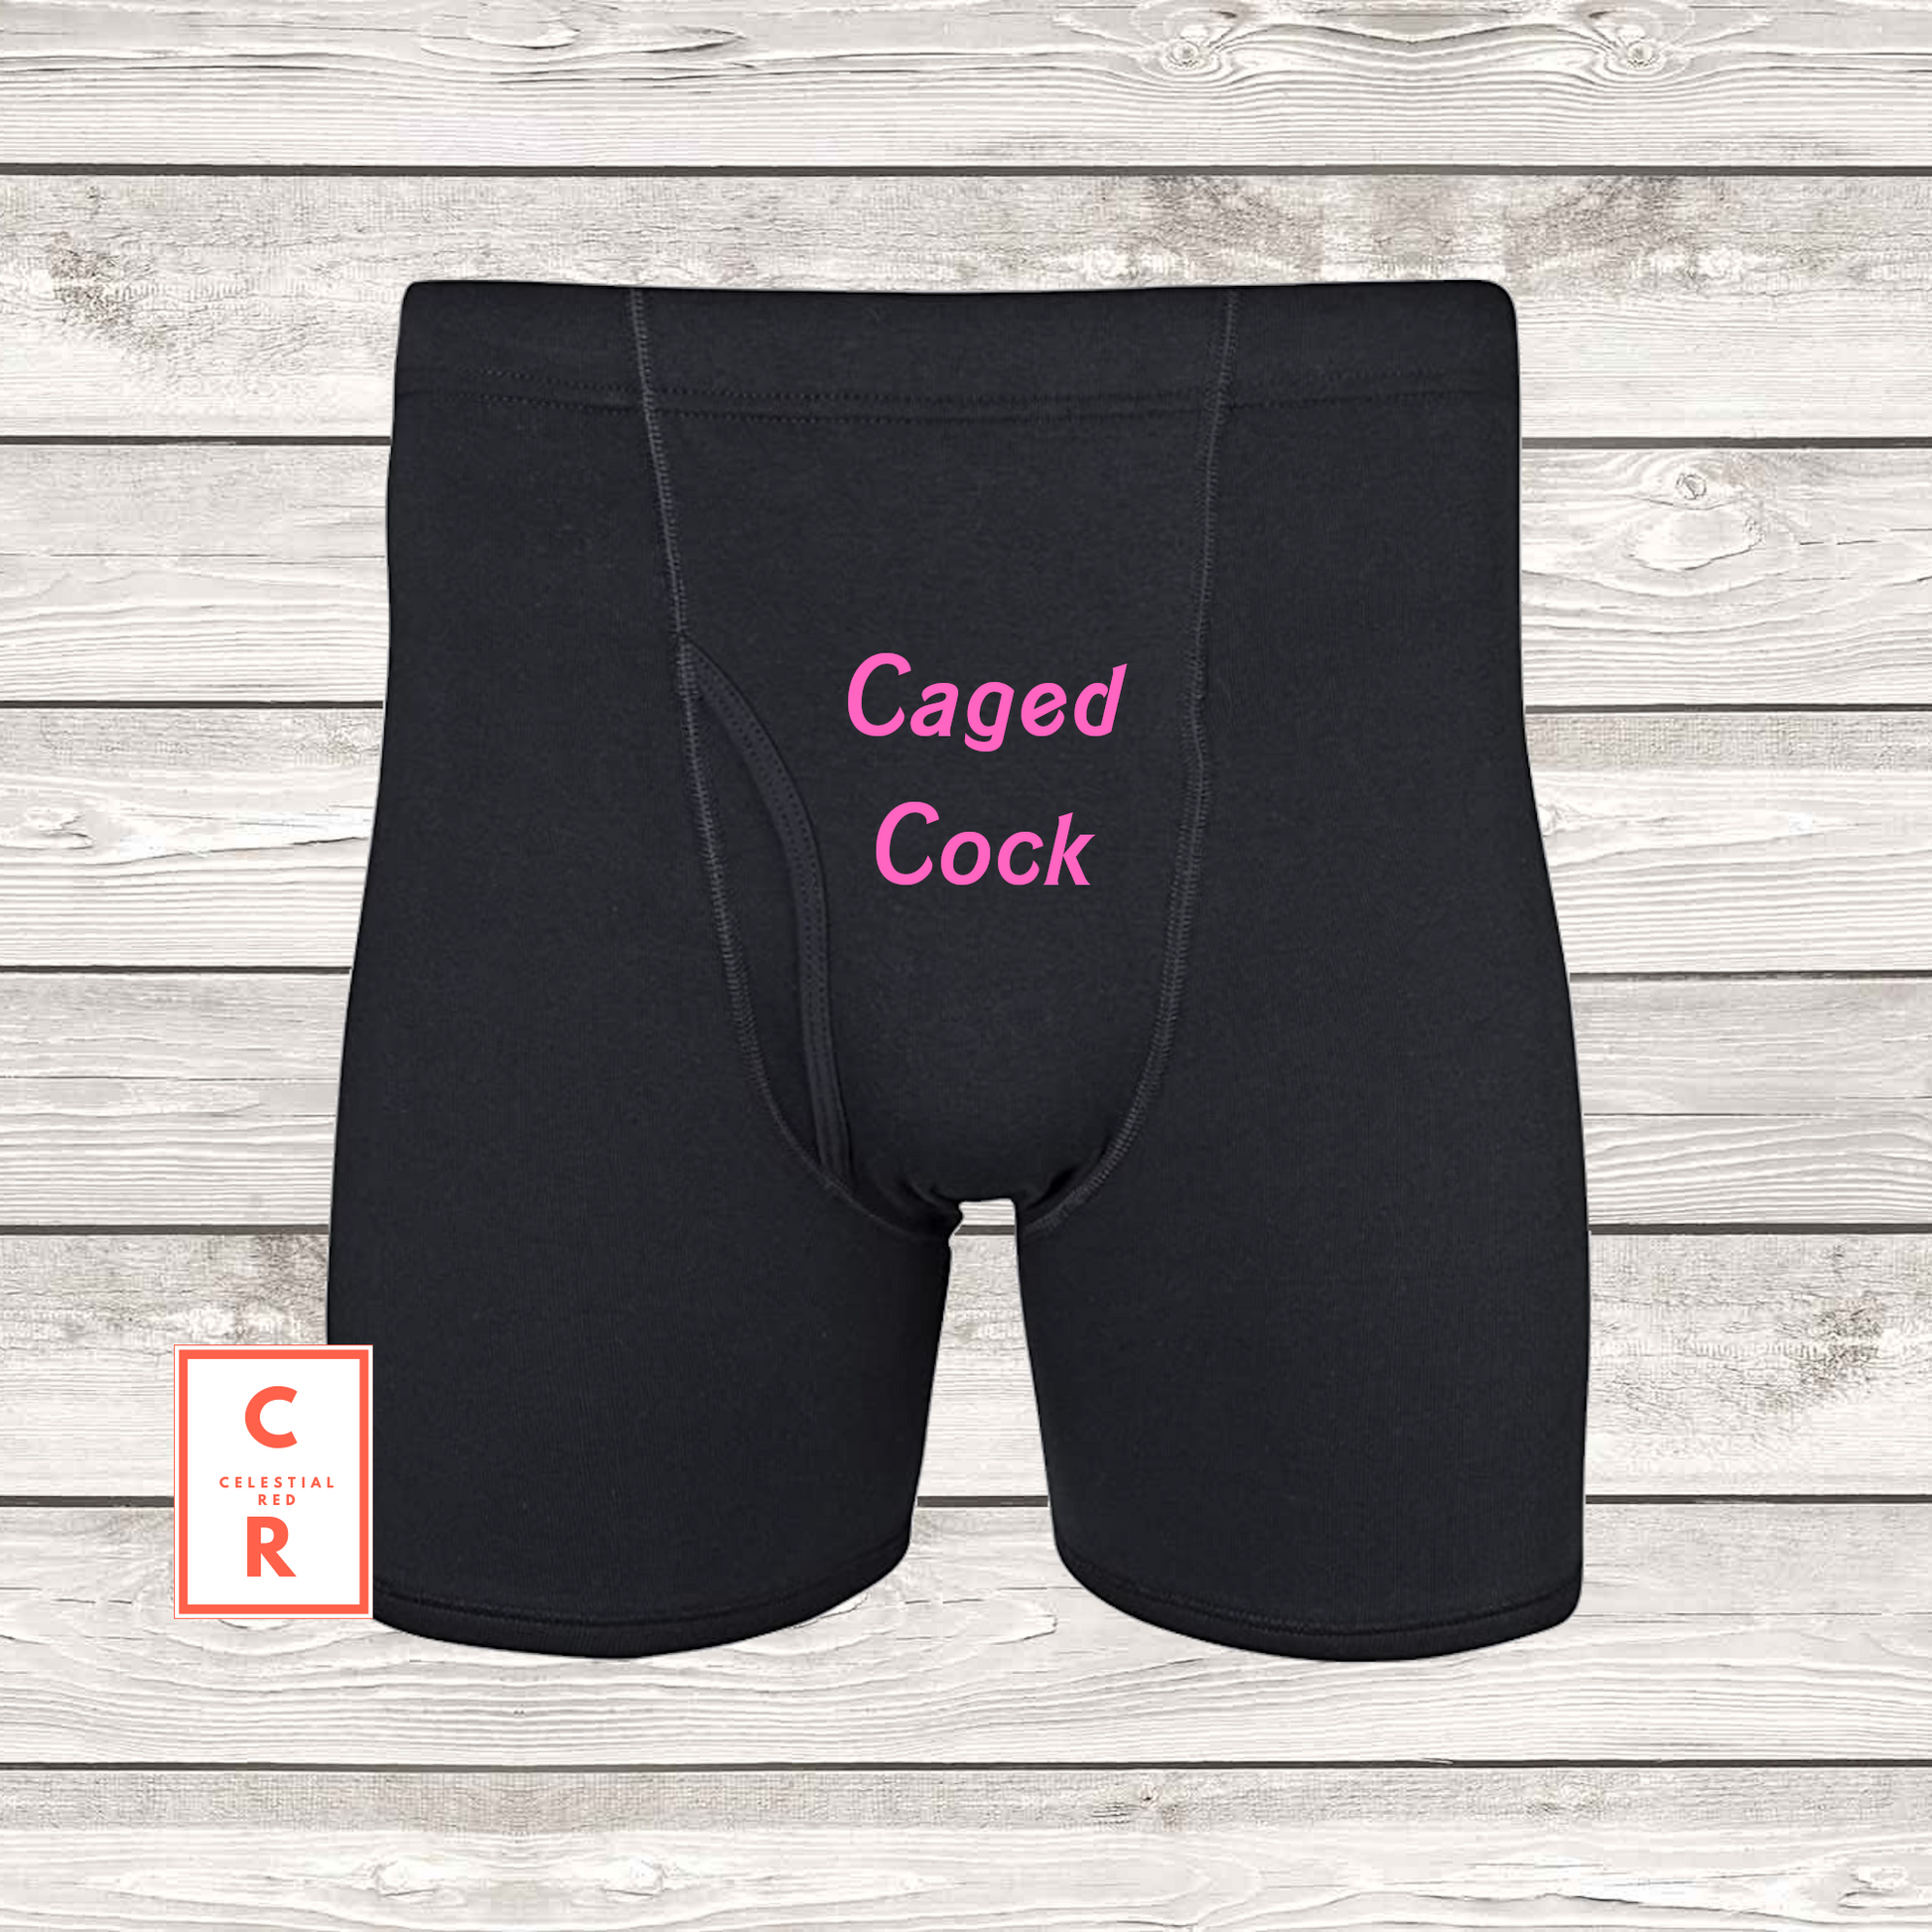 Caged cock sph Boxers